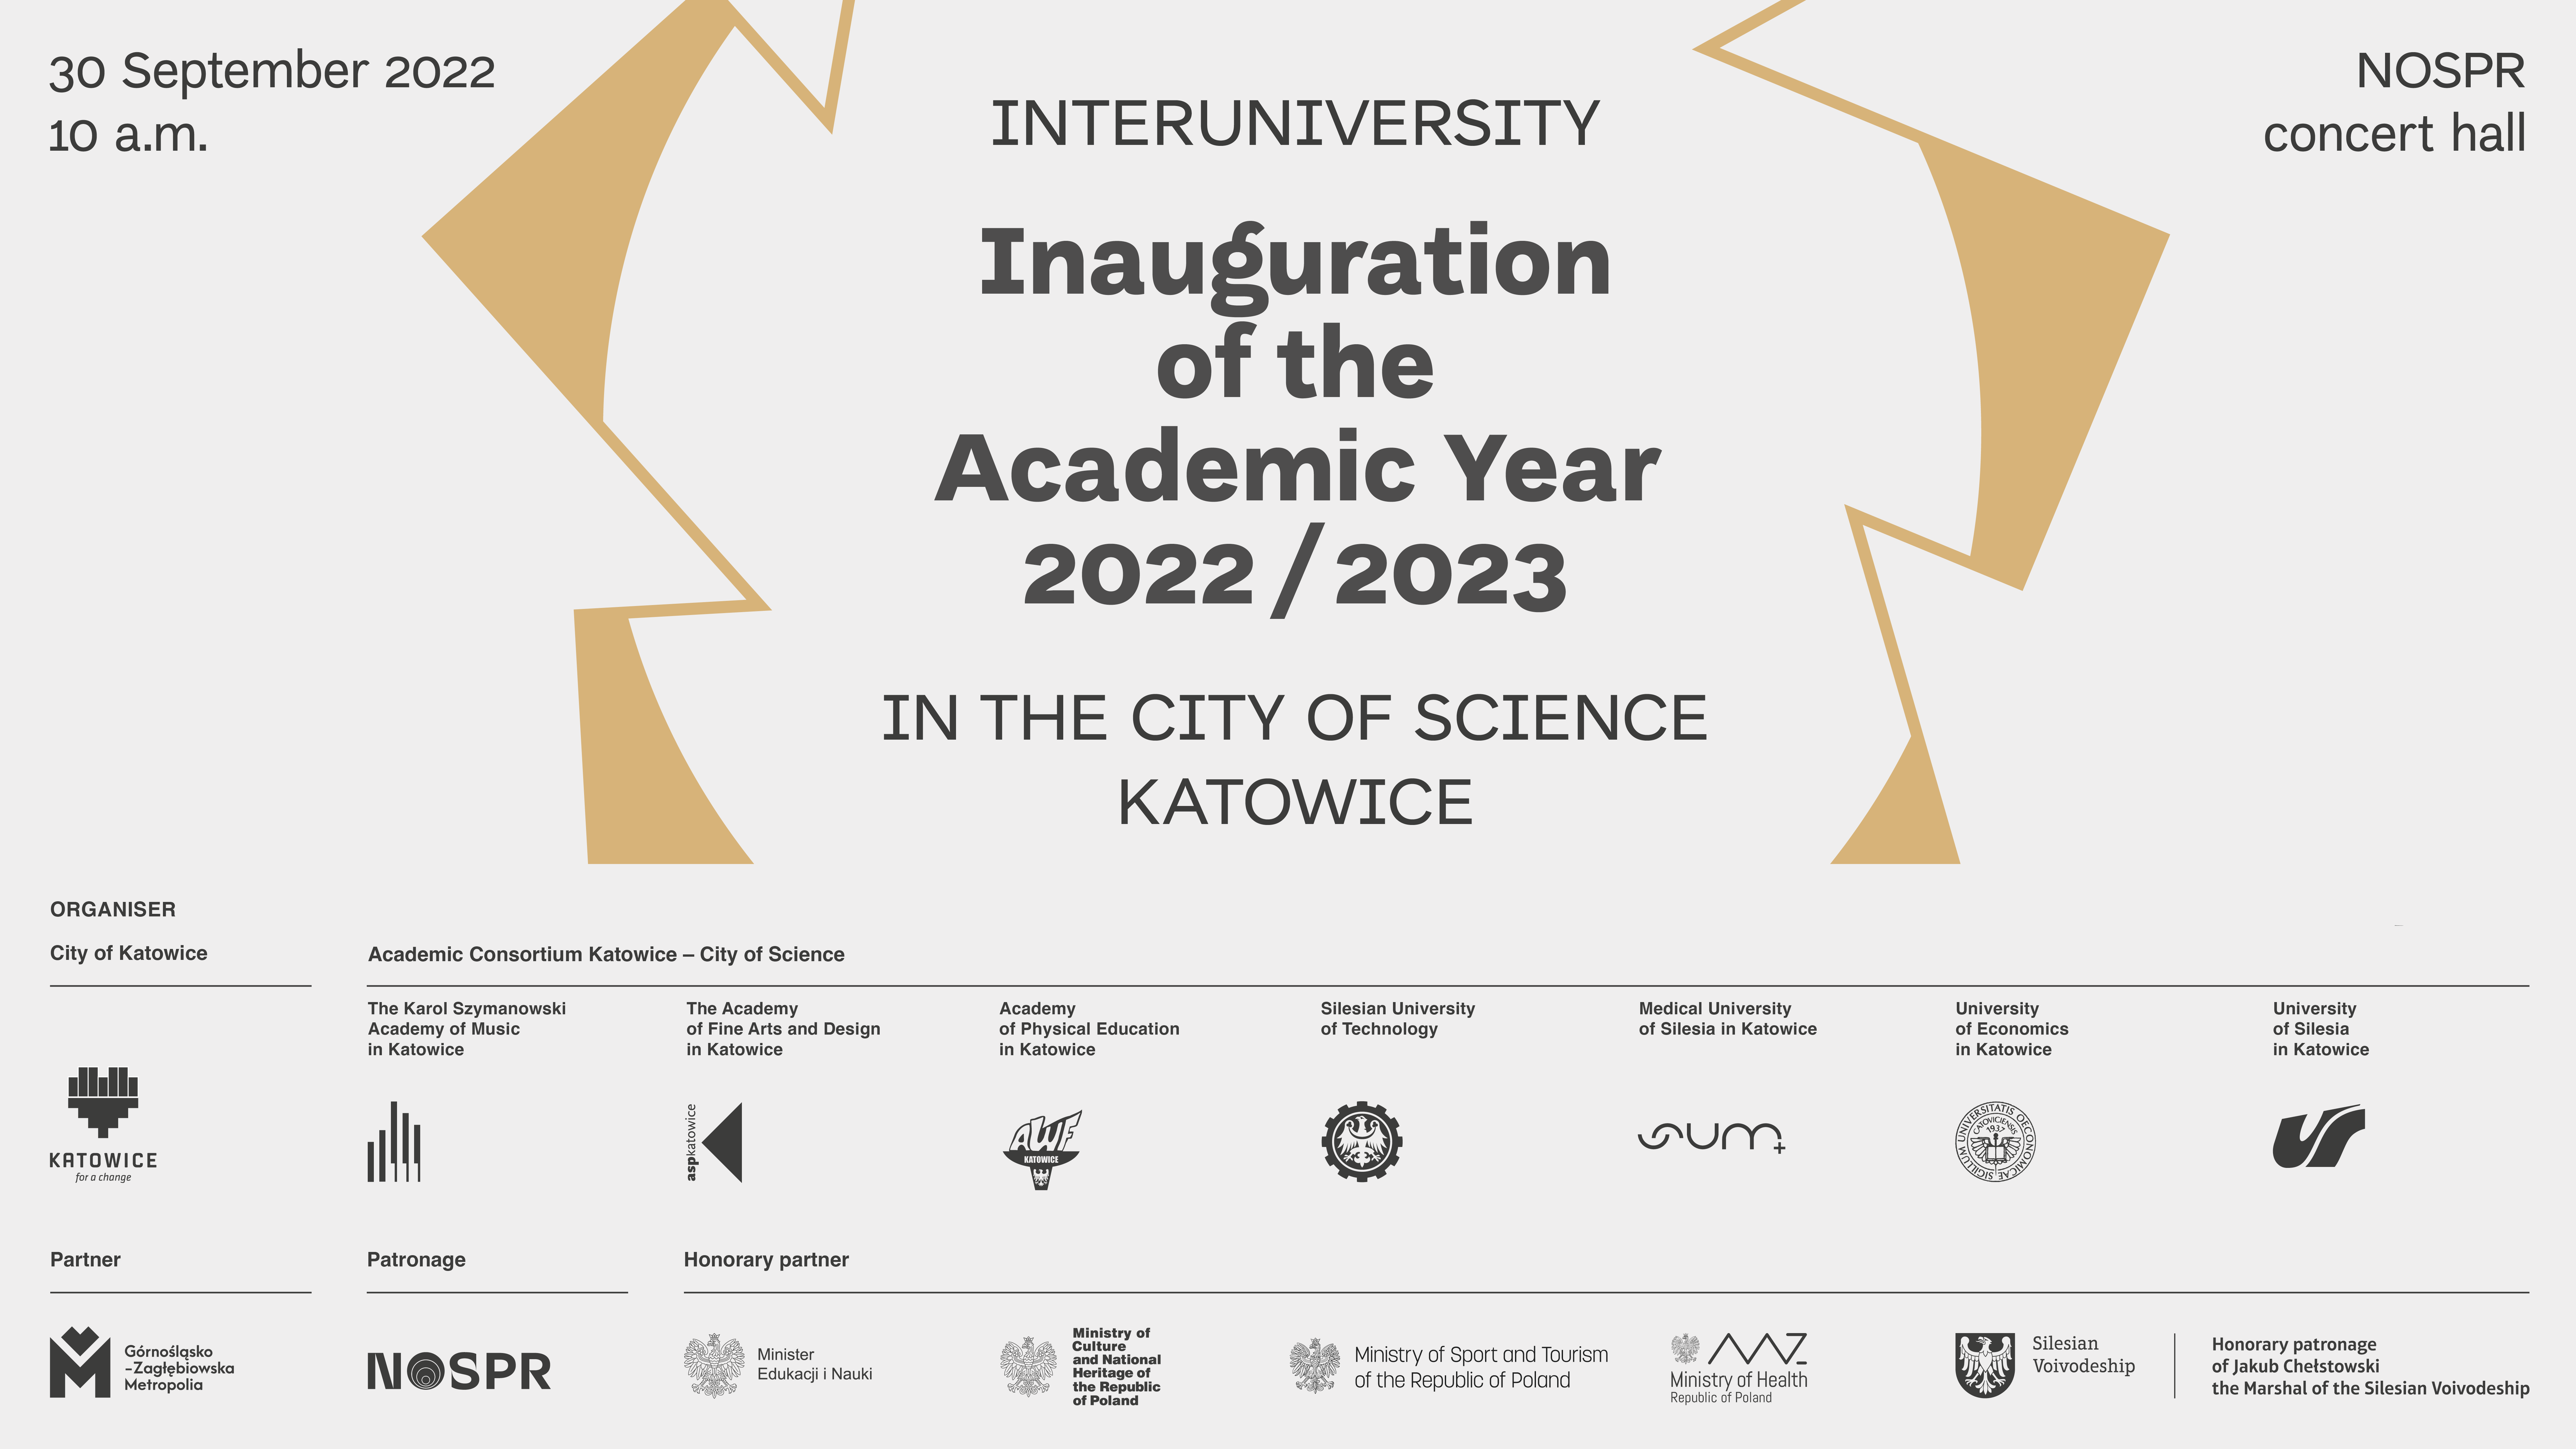 poster for the interuniversity inauguration of the academic year 2022/2023